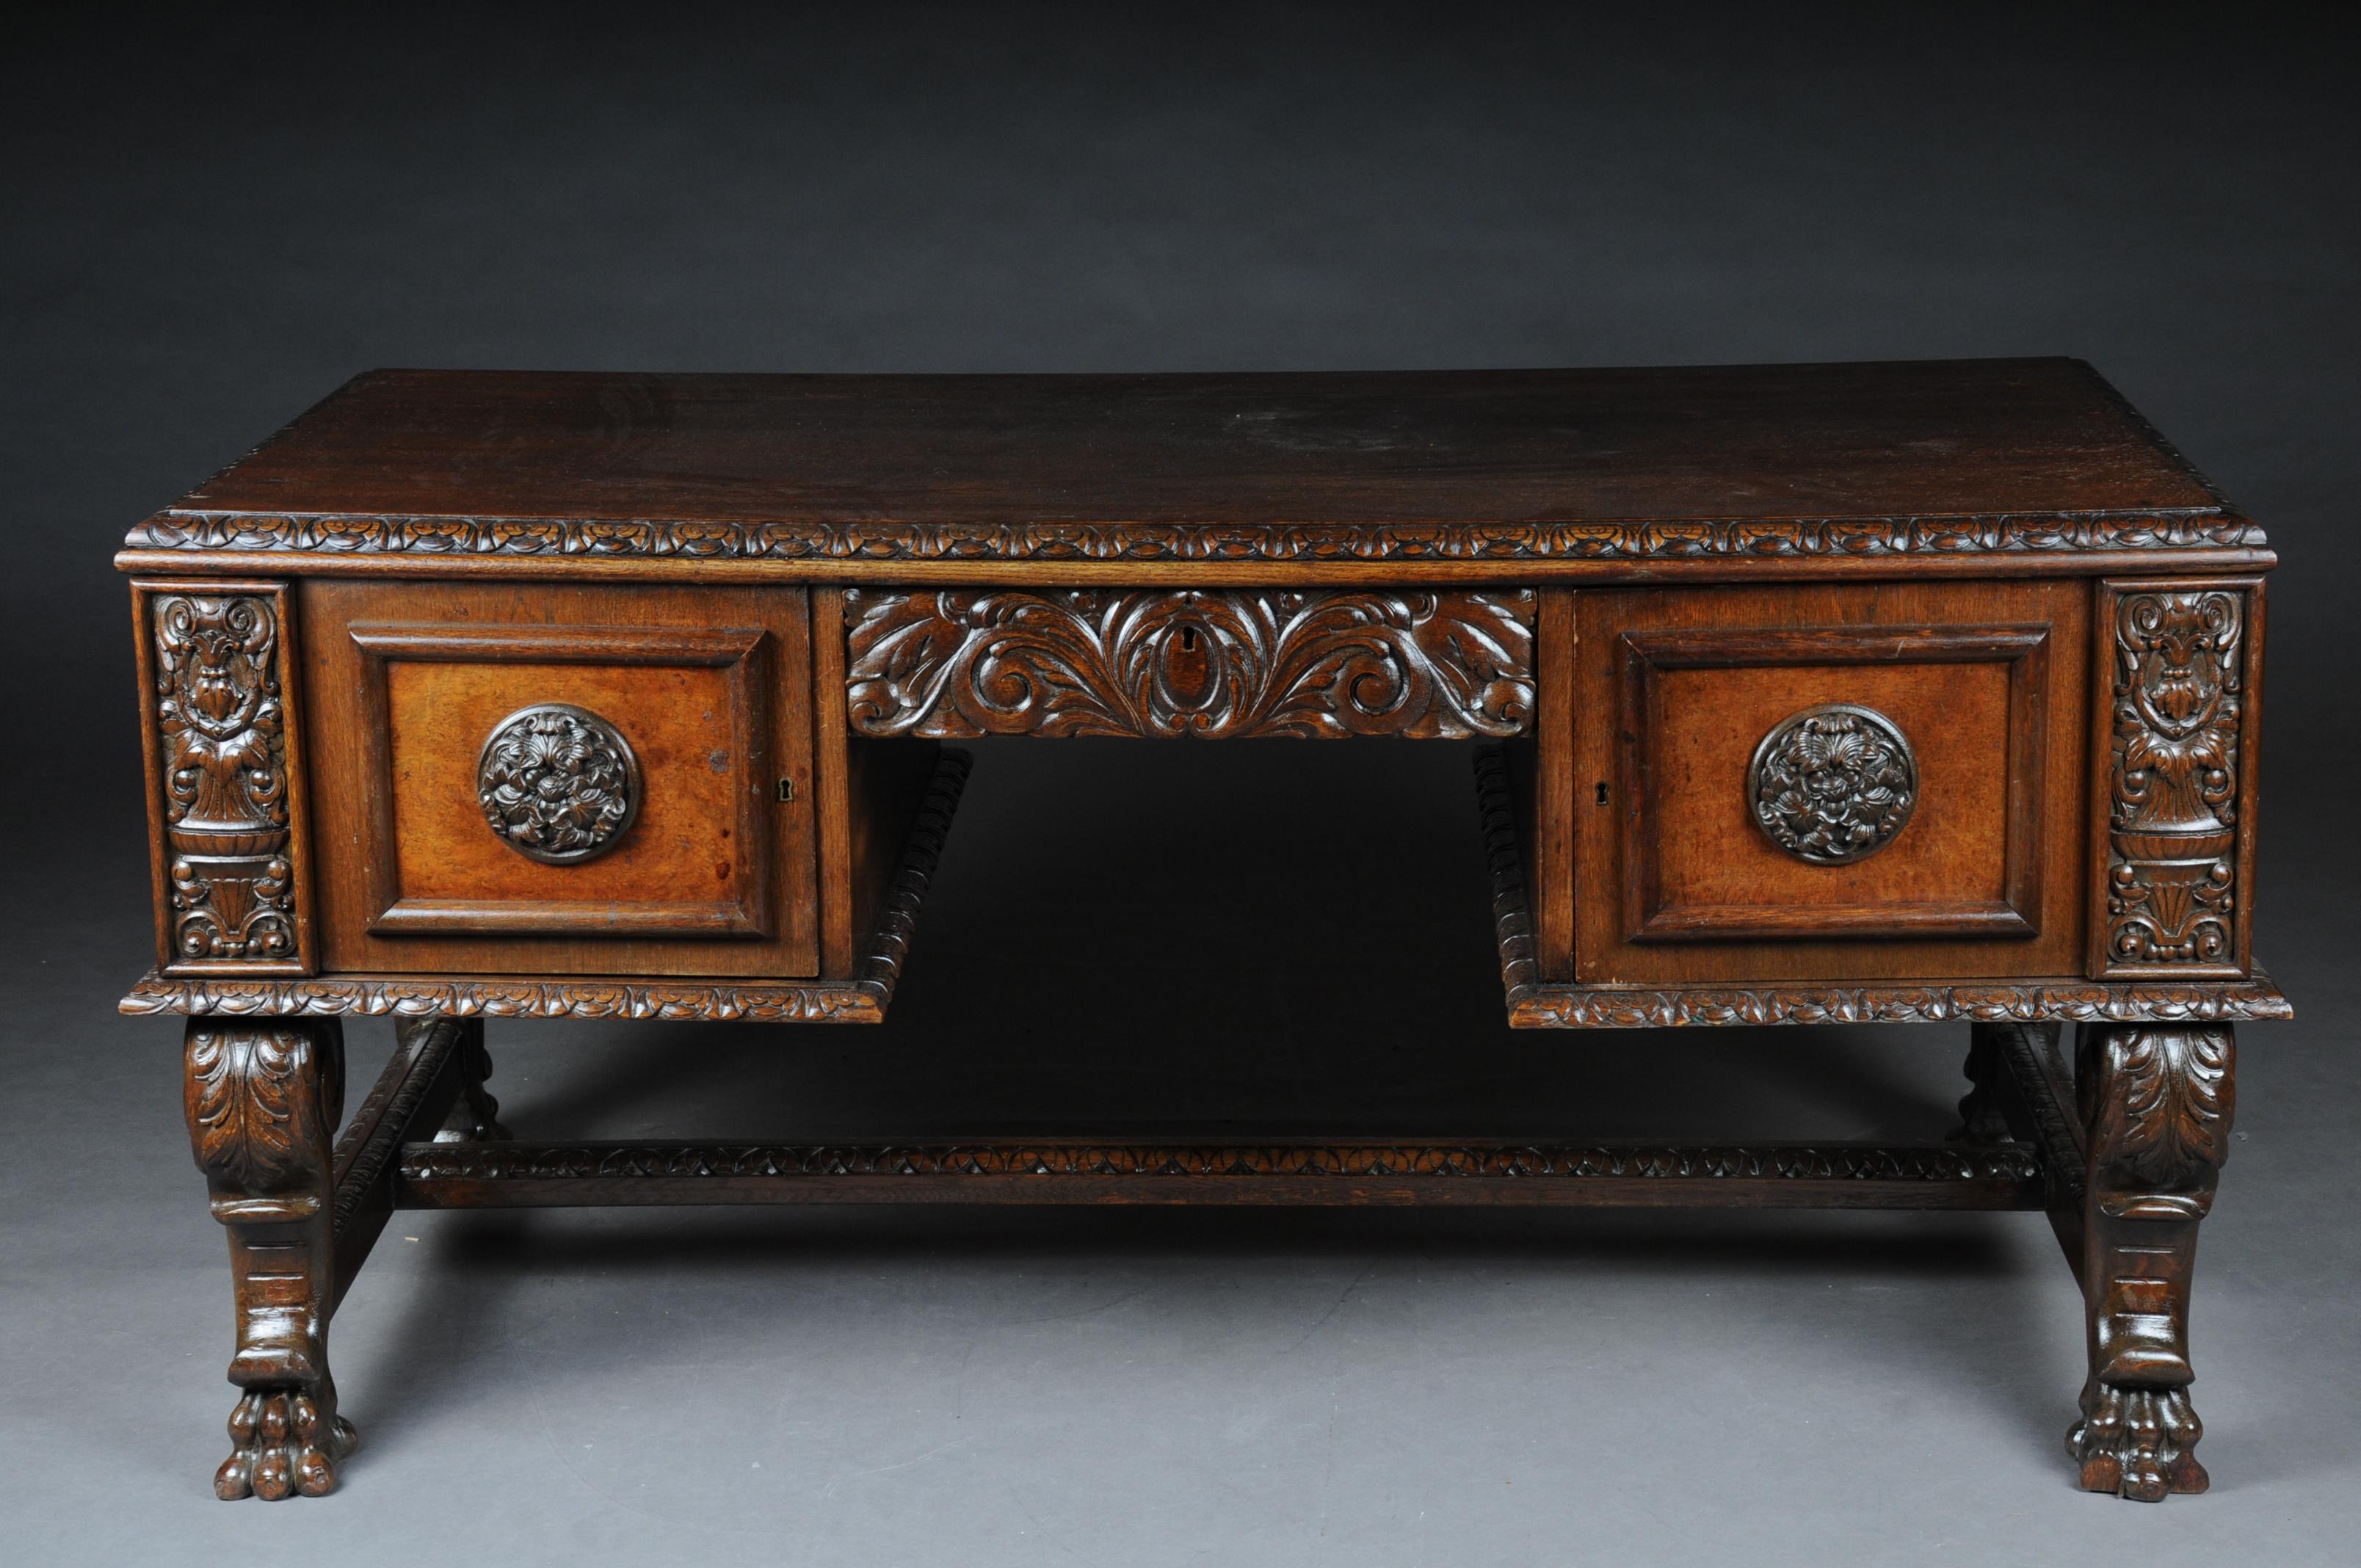 20th Century Lordly Historicism Desk Solid Oak with Walnut Veneer For Sale 10